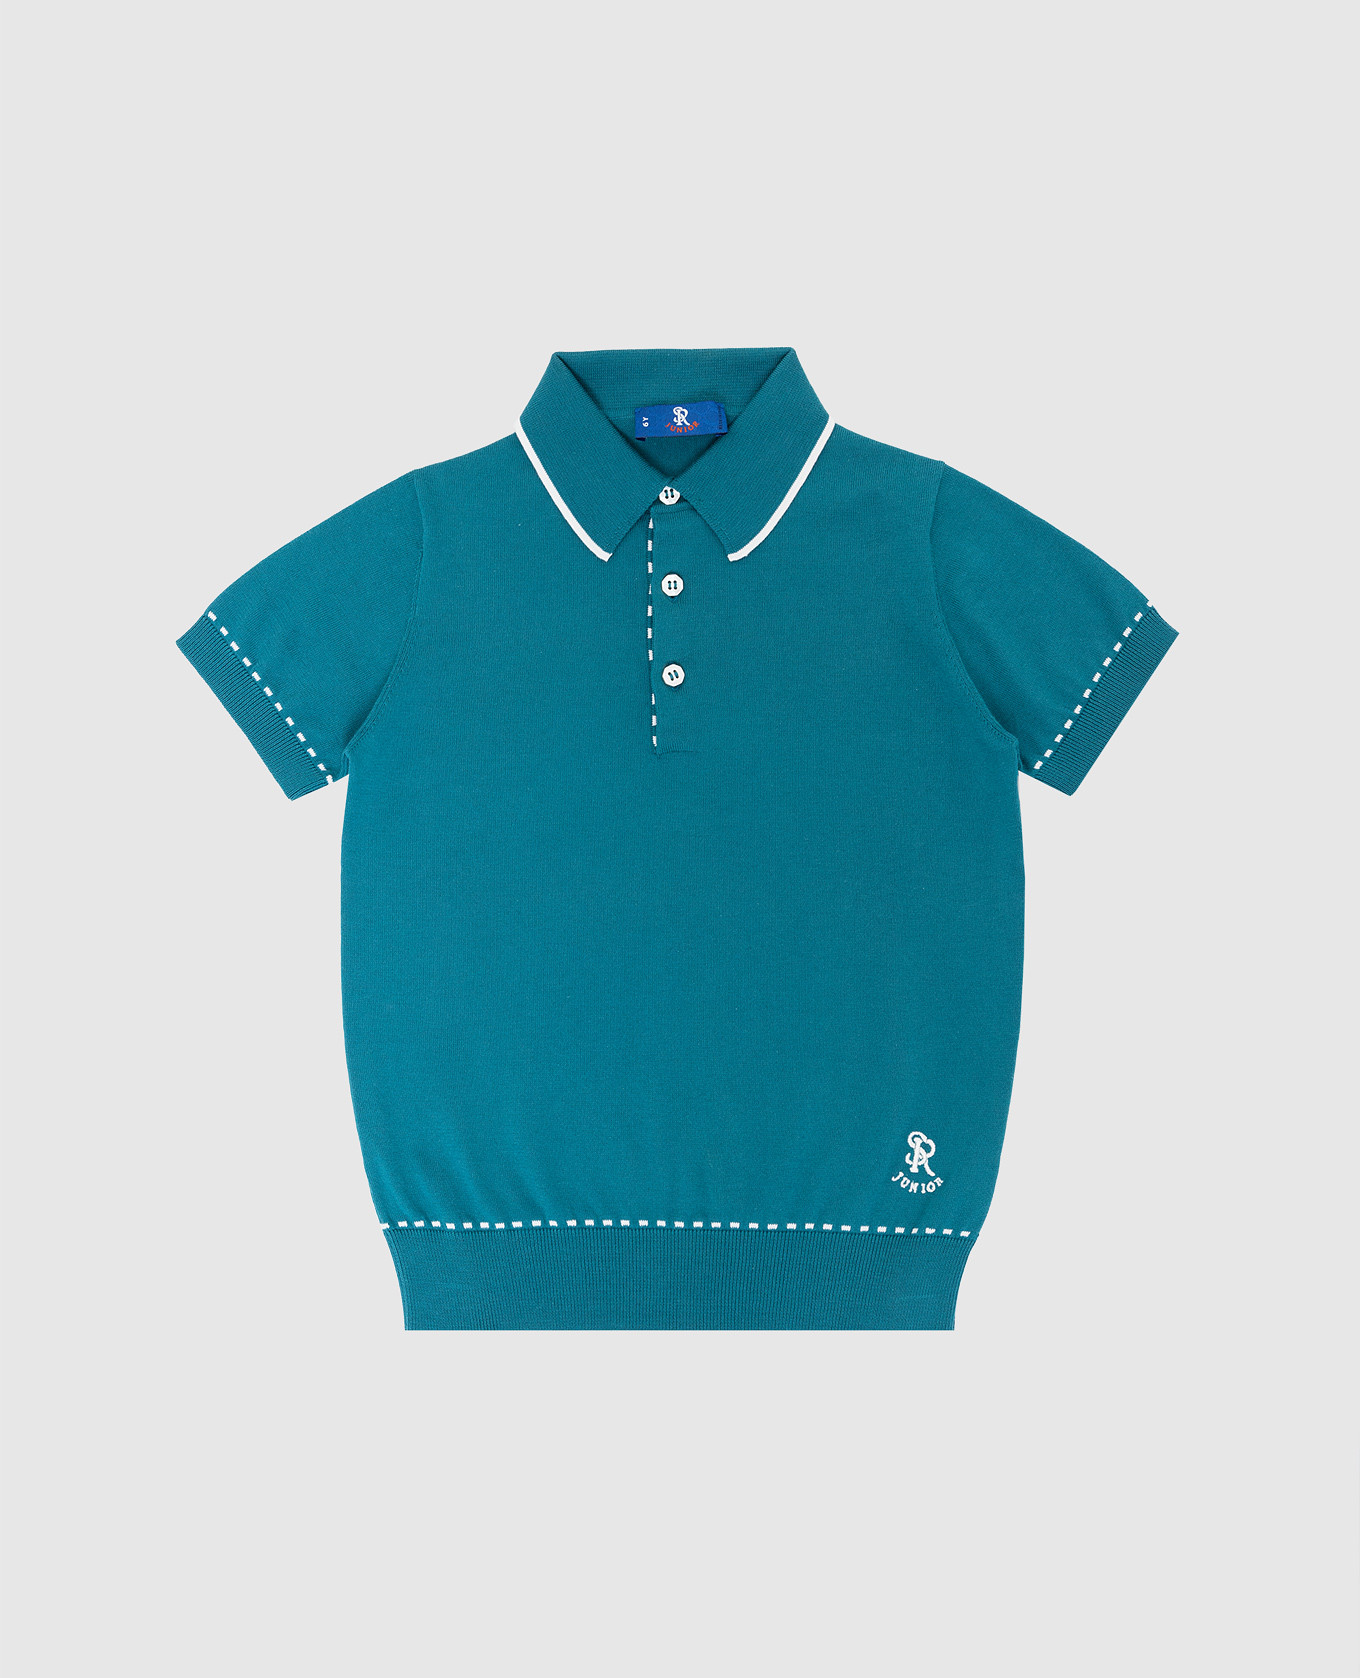 Children's dark turquoise polo with embroidery